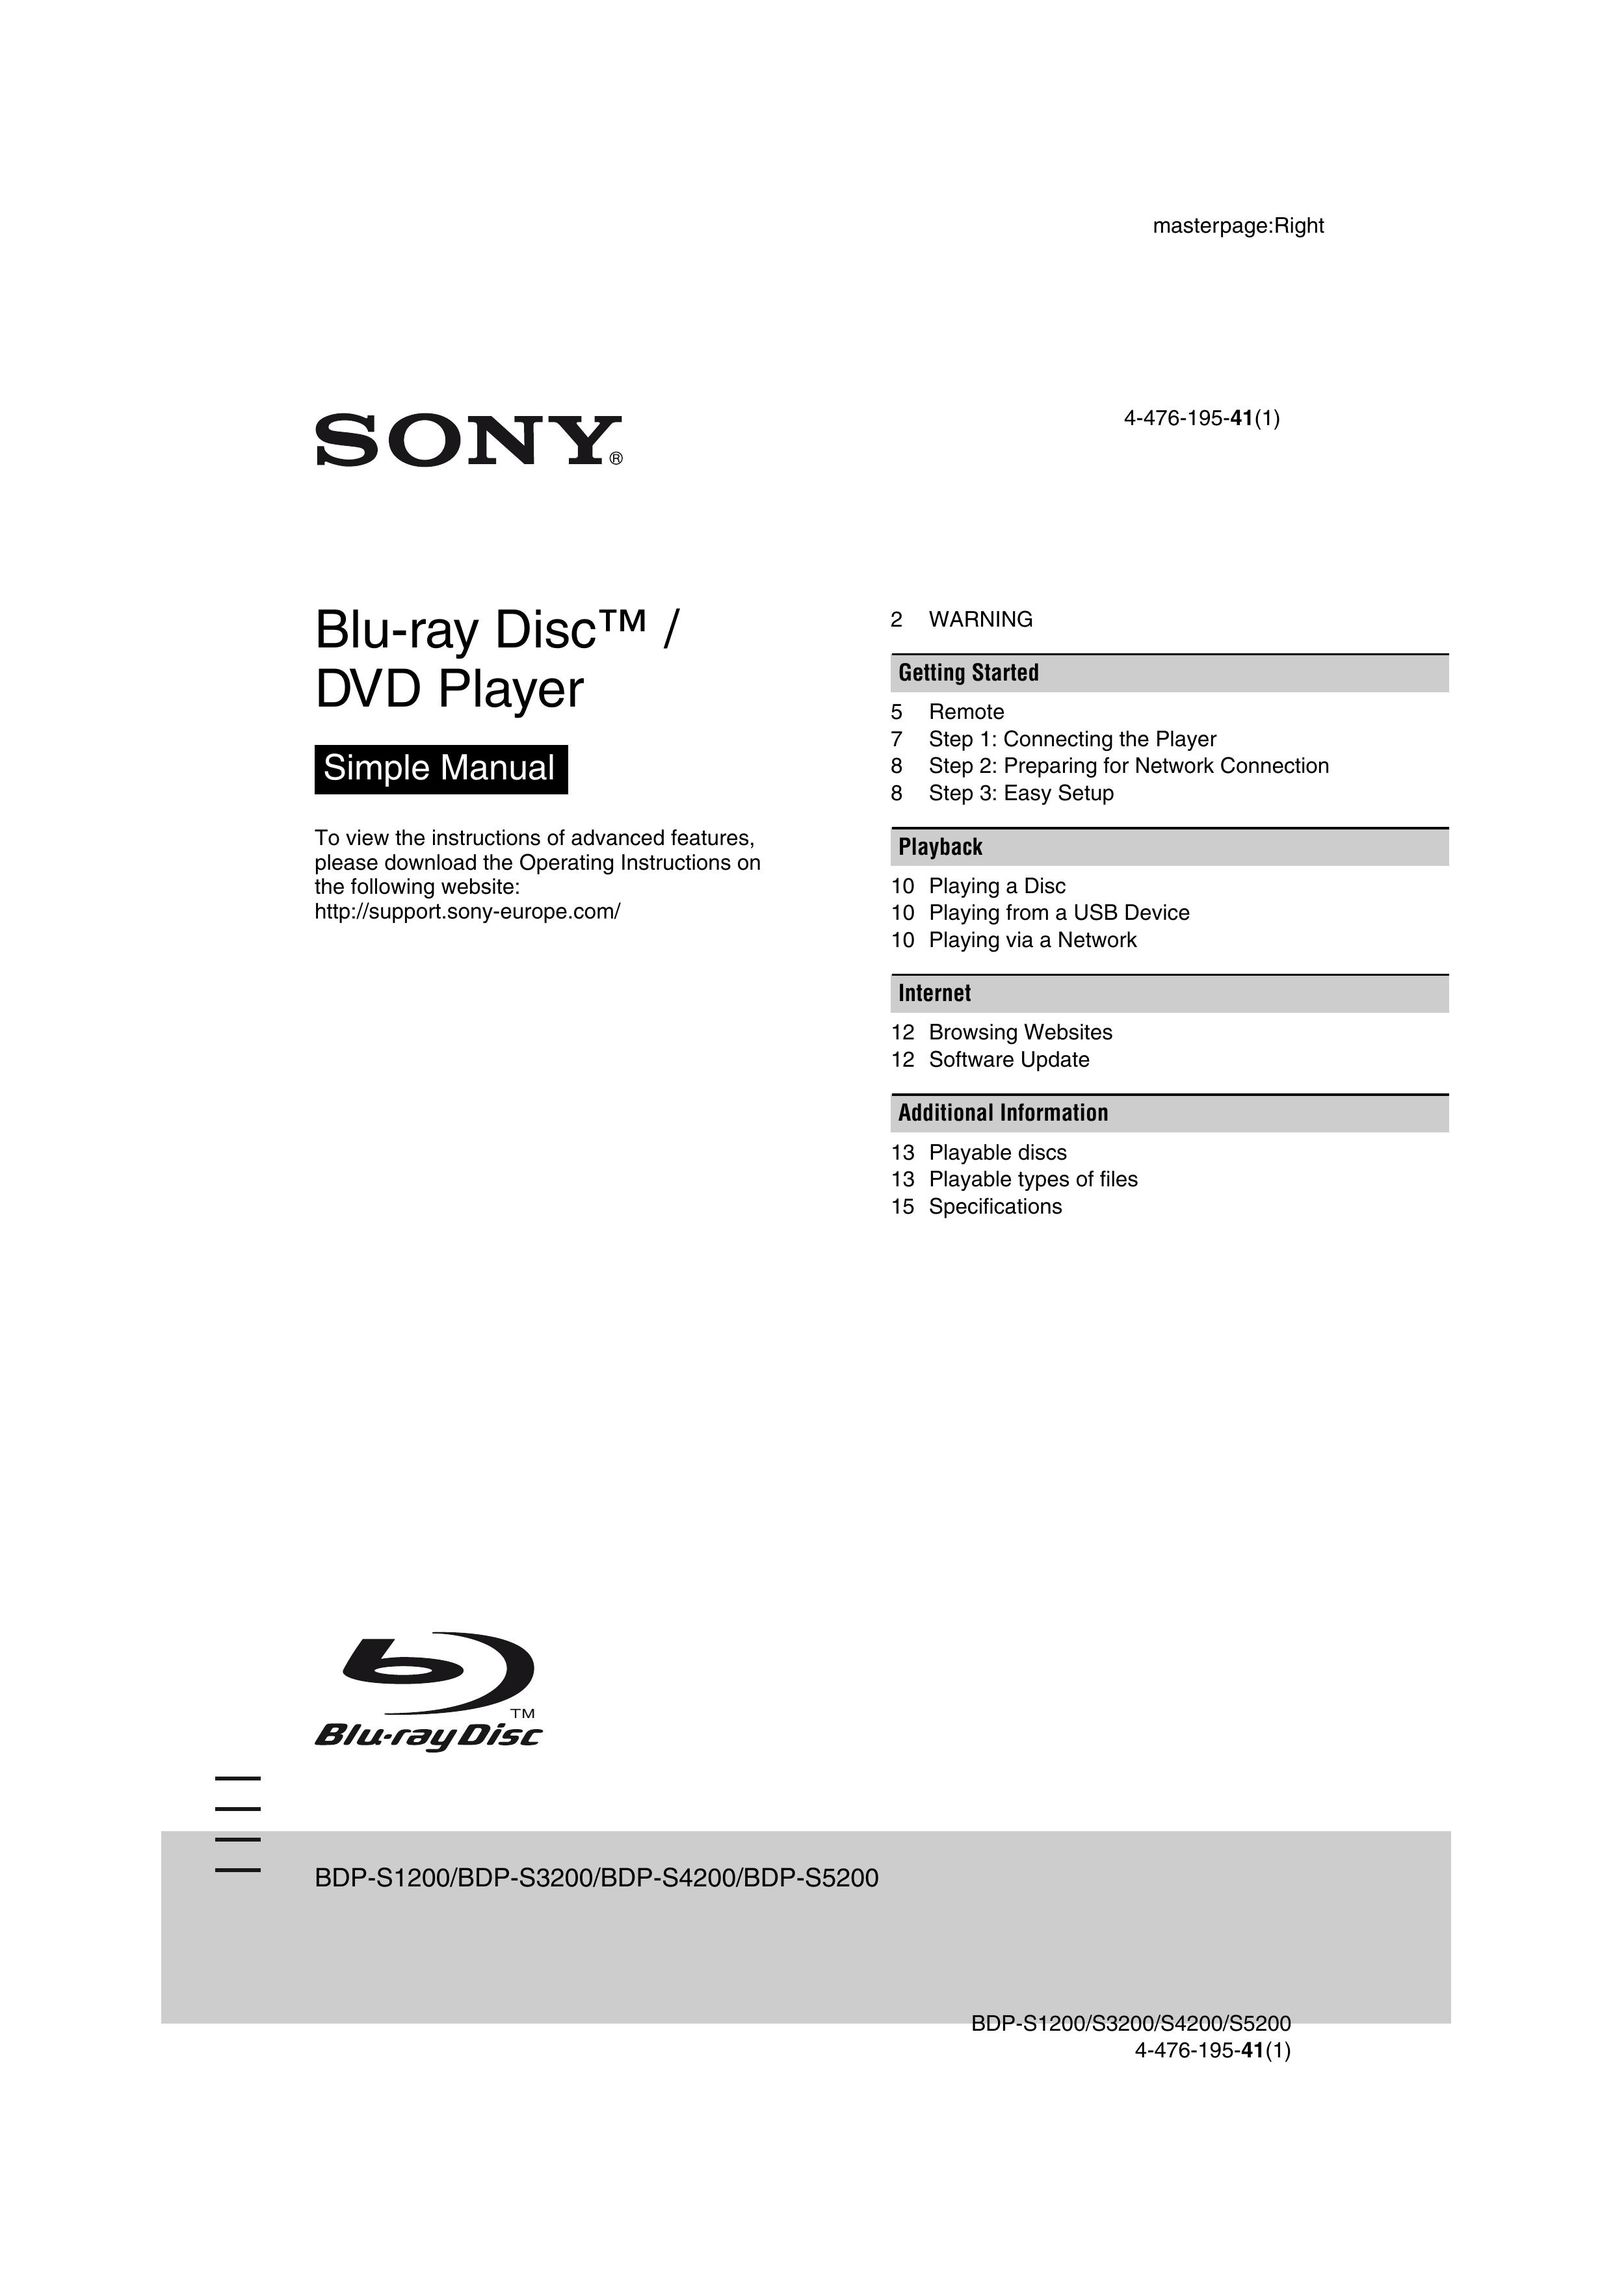 Sony BDP-S5200 Blu-ray Player User Manual